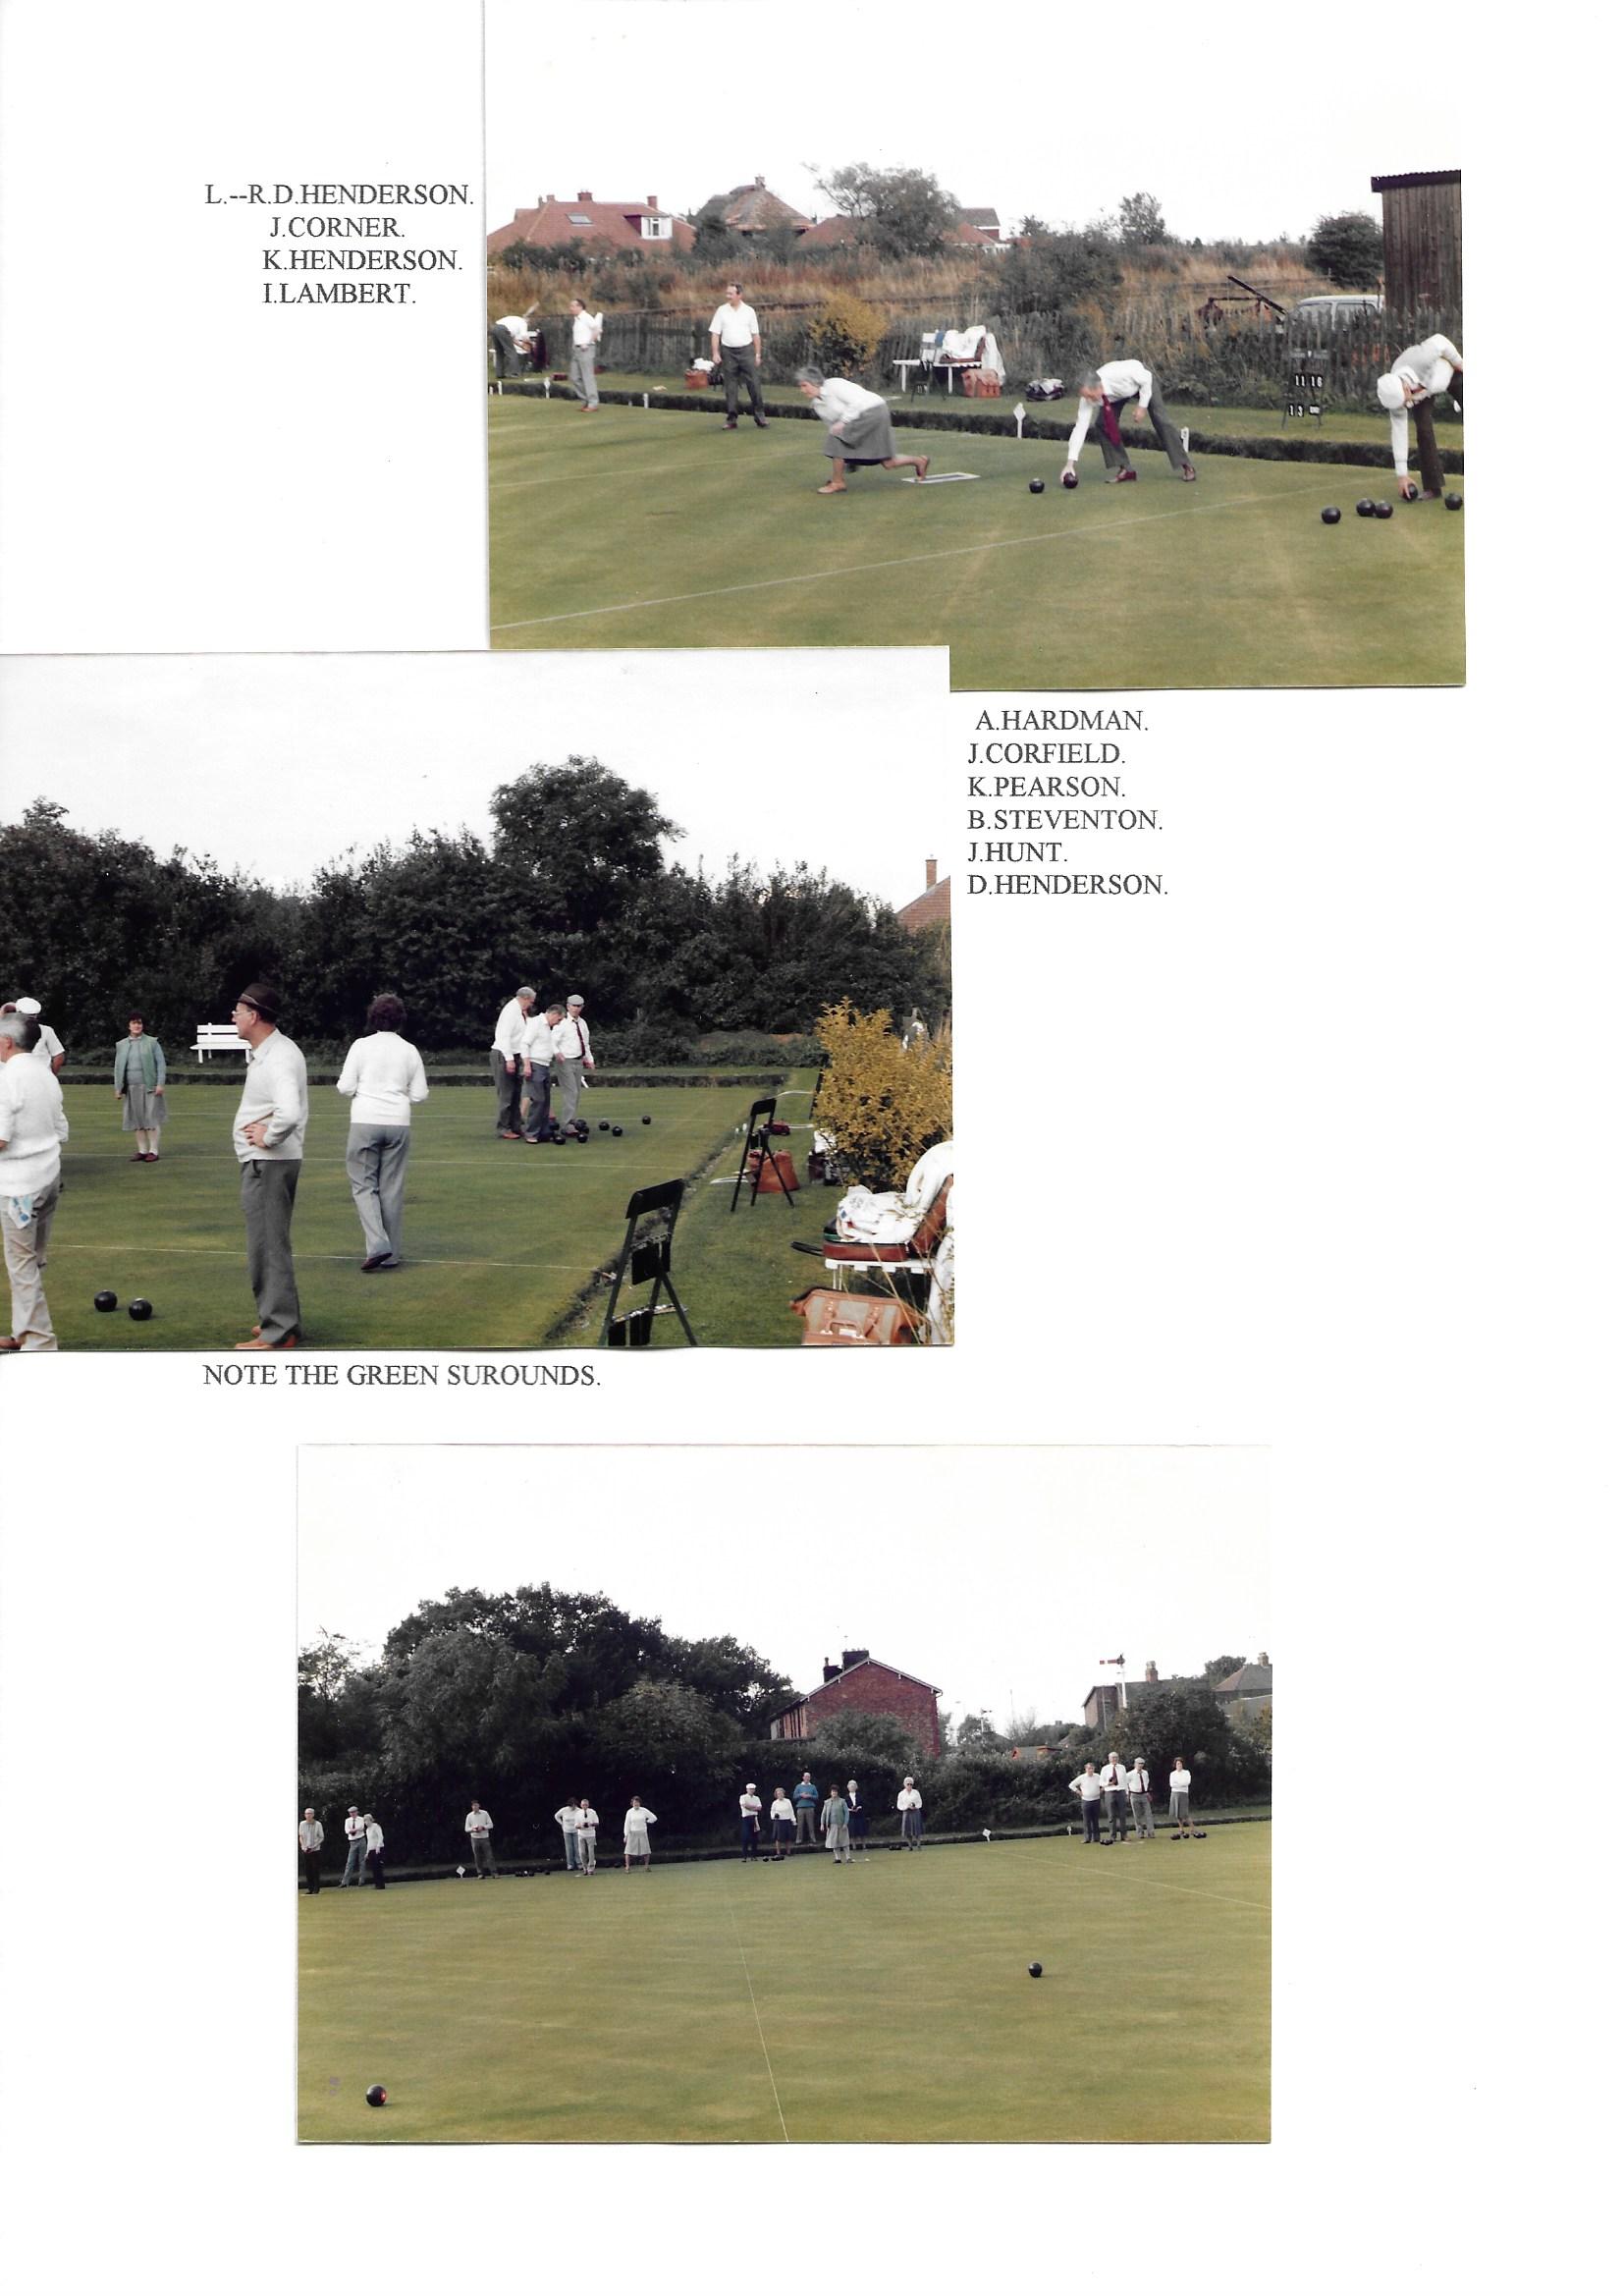 Nunthorpe Bowling Club Other photographs (some dated)